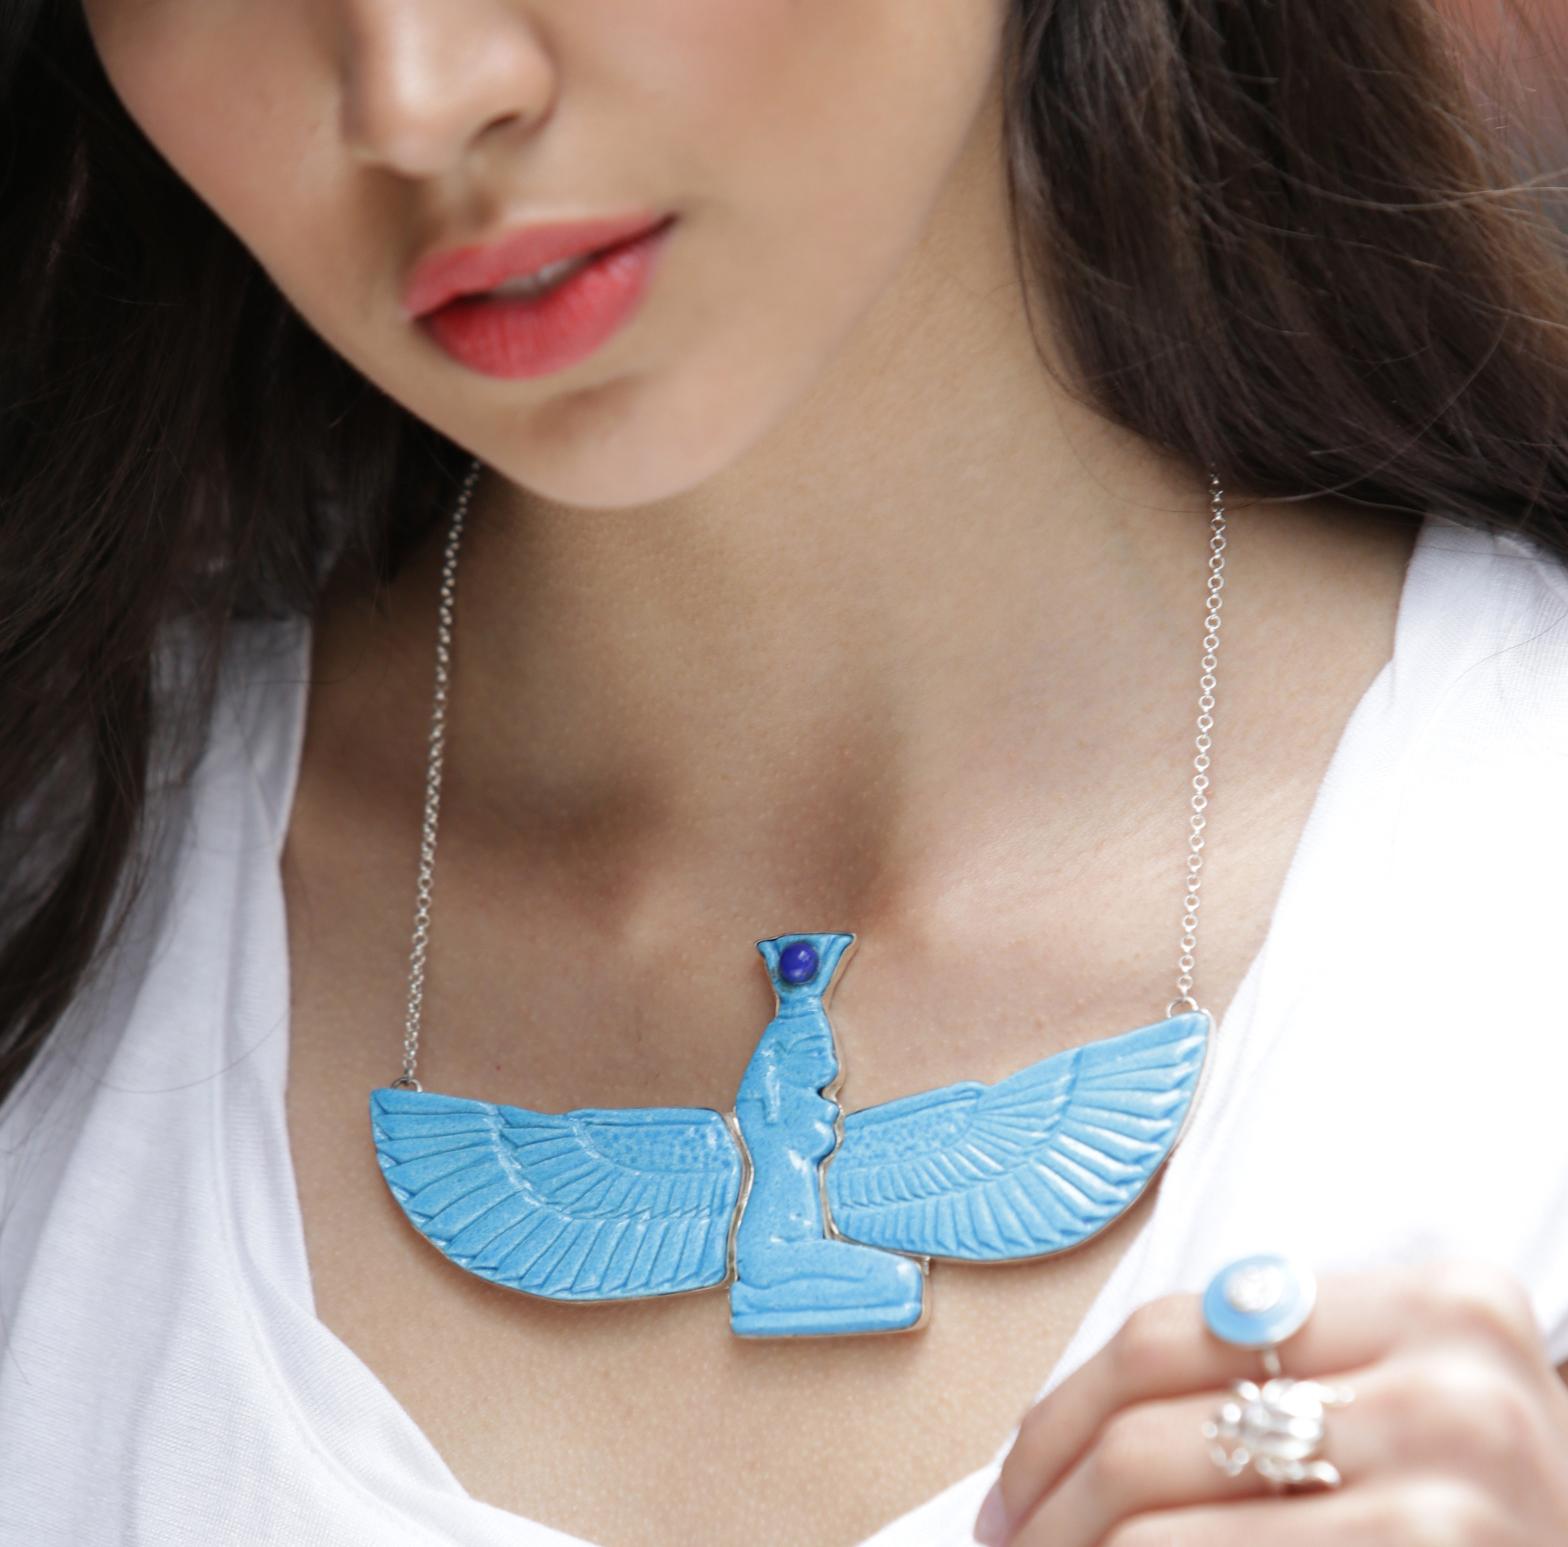 This show-stopping one of a kind piece features the Goddess Isis who spreads her wings proudly. Hand made in Egyptian Faience, it is as if you rated your own tomb.

Worshiped in Ancient Egypt for being the ideal mother and wife alongside being the